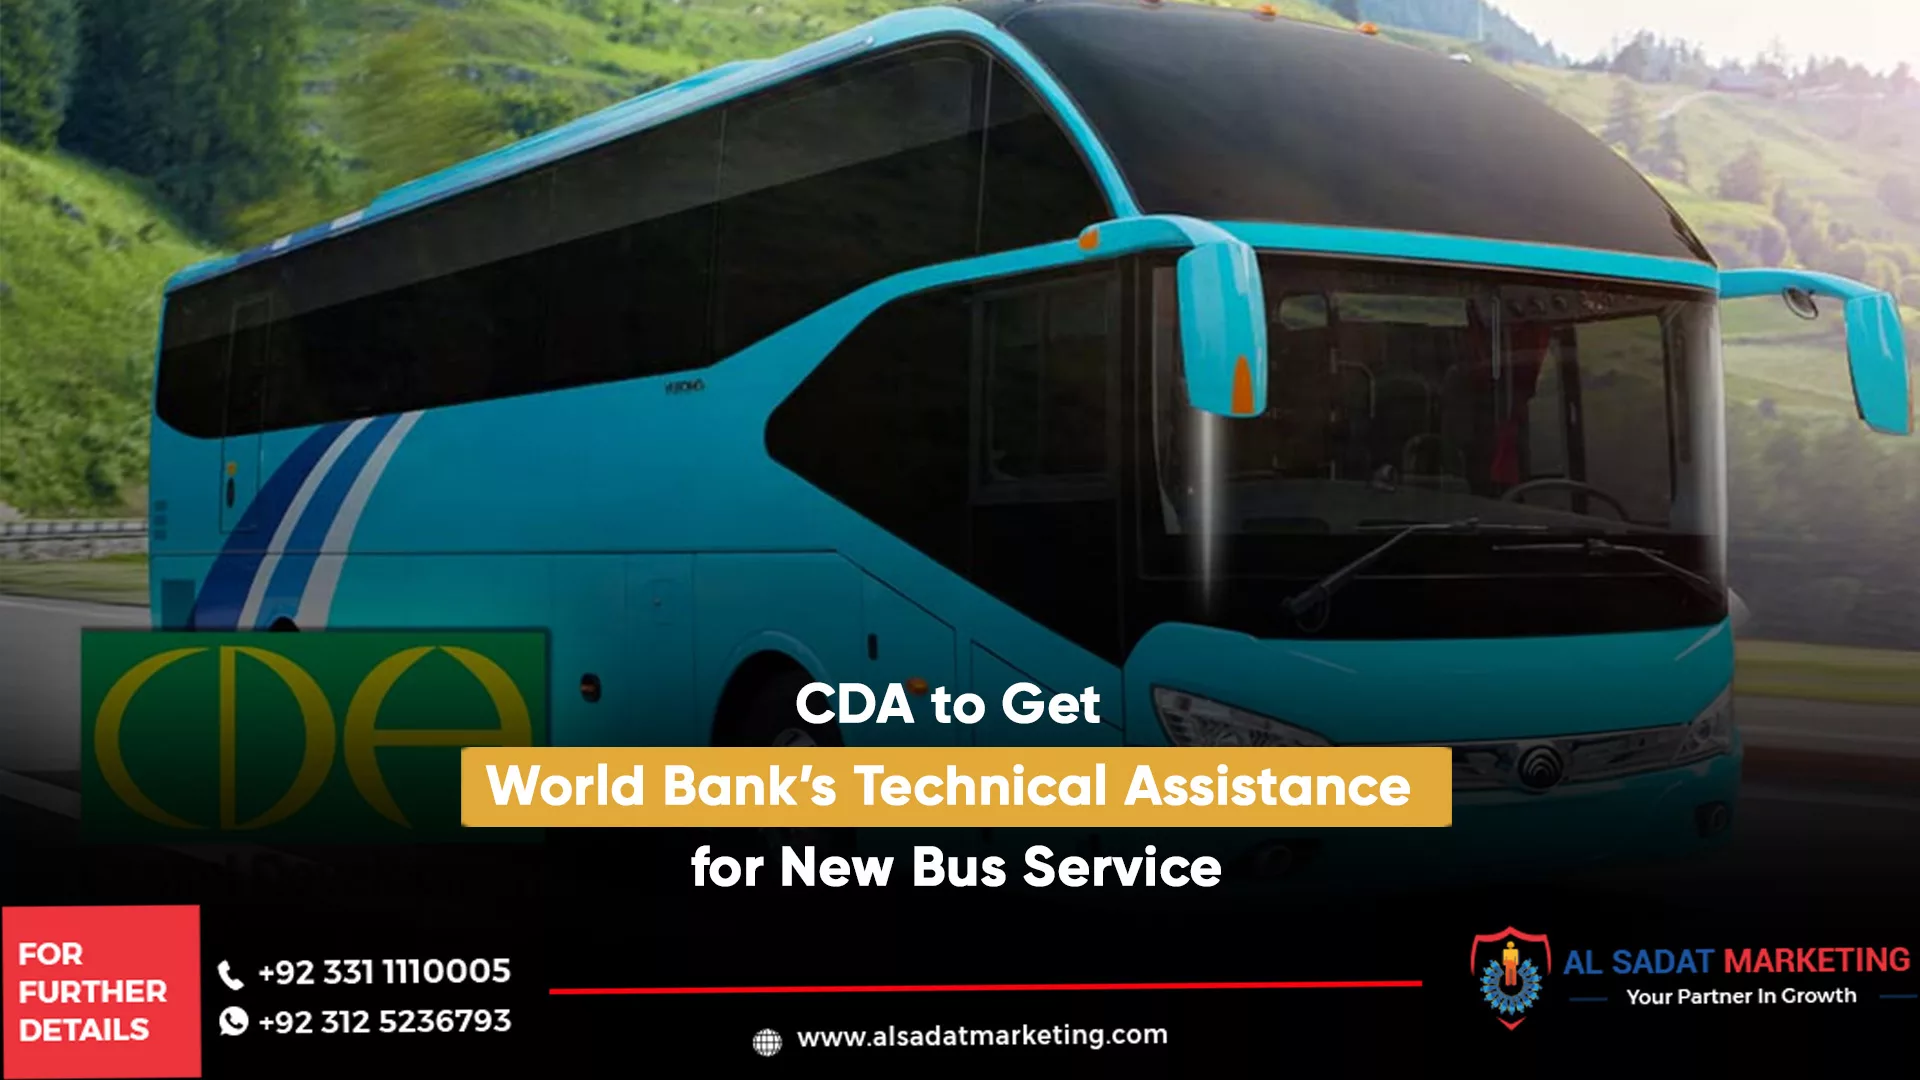 cda to get world bank’s technical assistance for new bus service, al sadat marketing, real estate agency in blue area islamabad